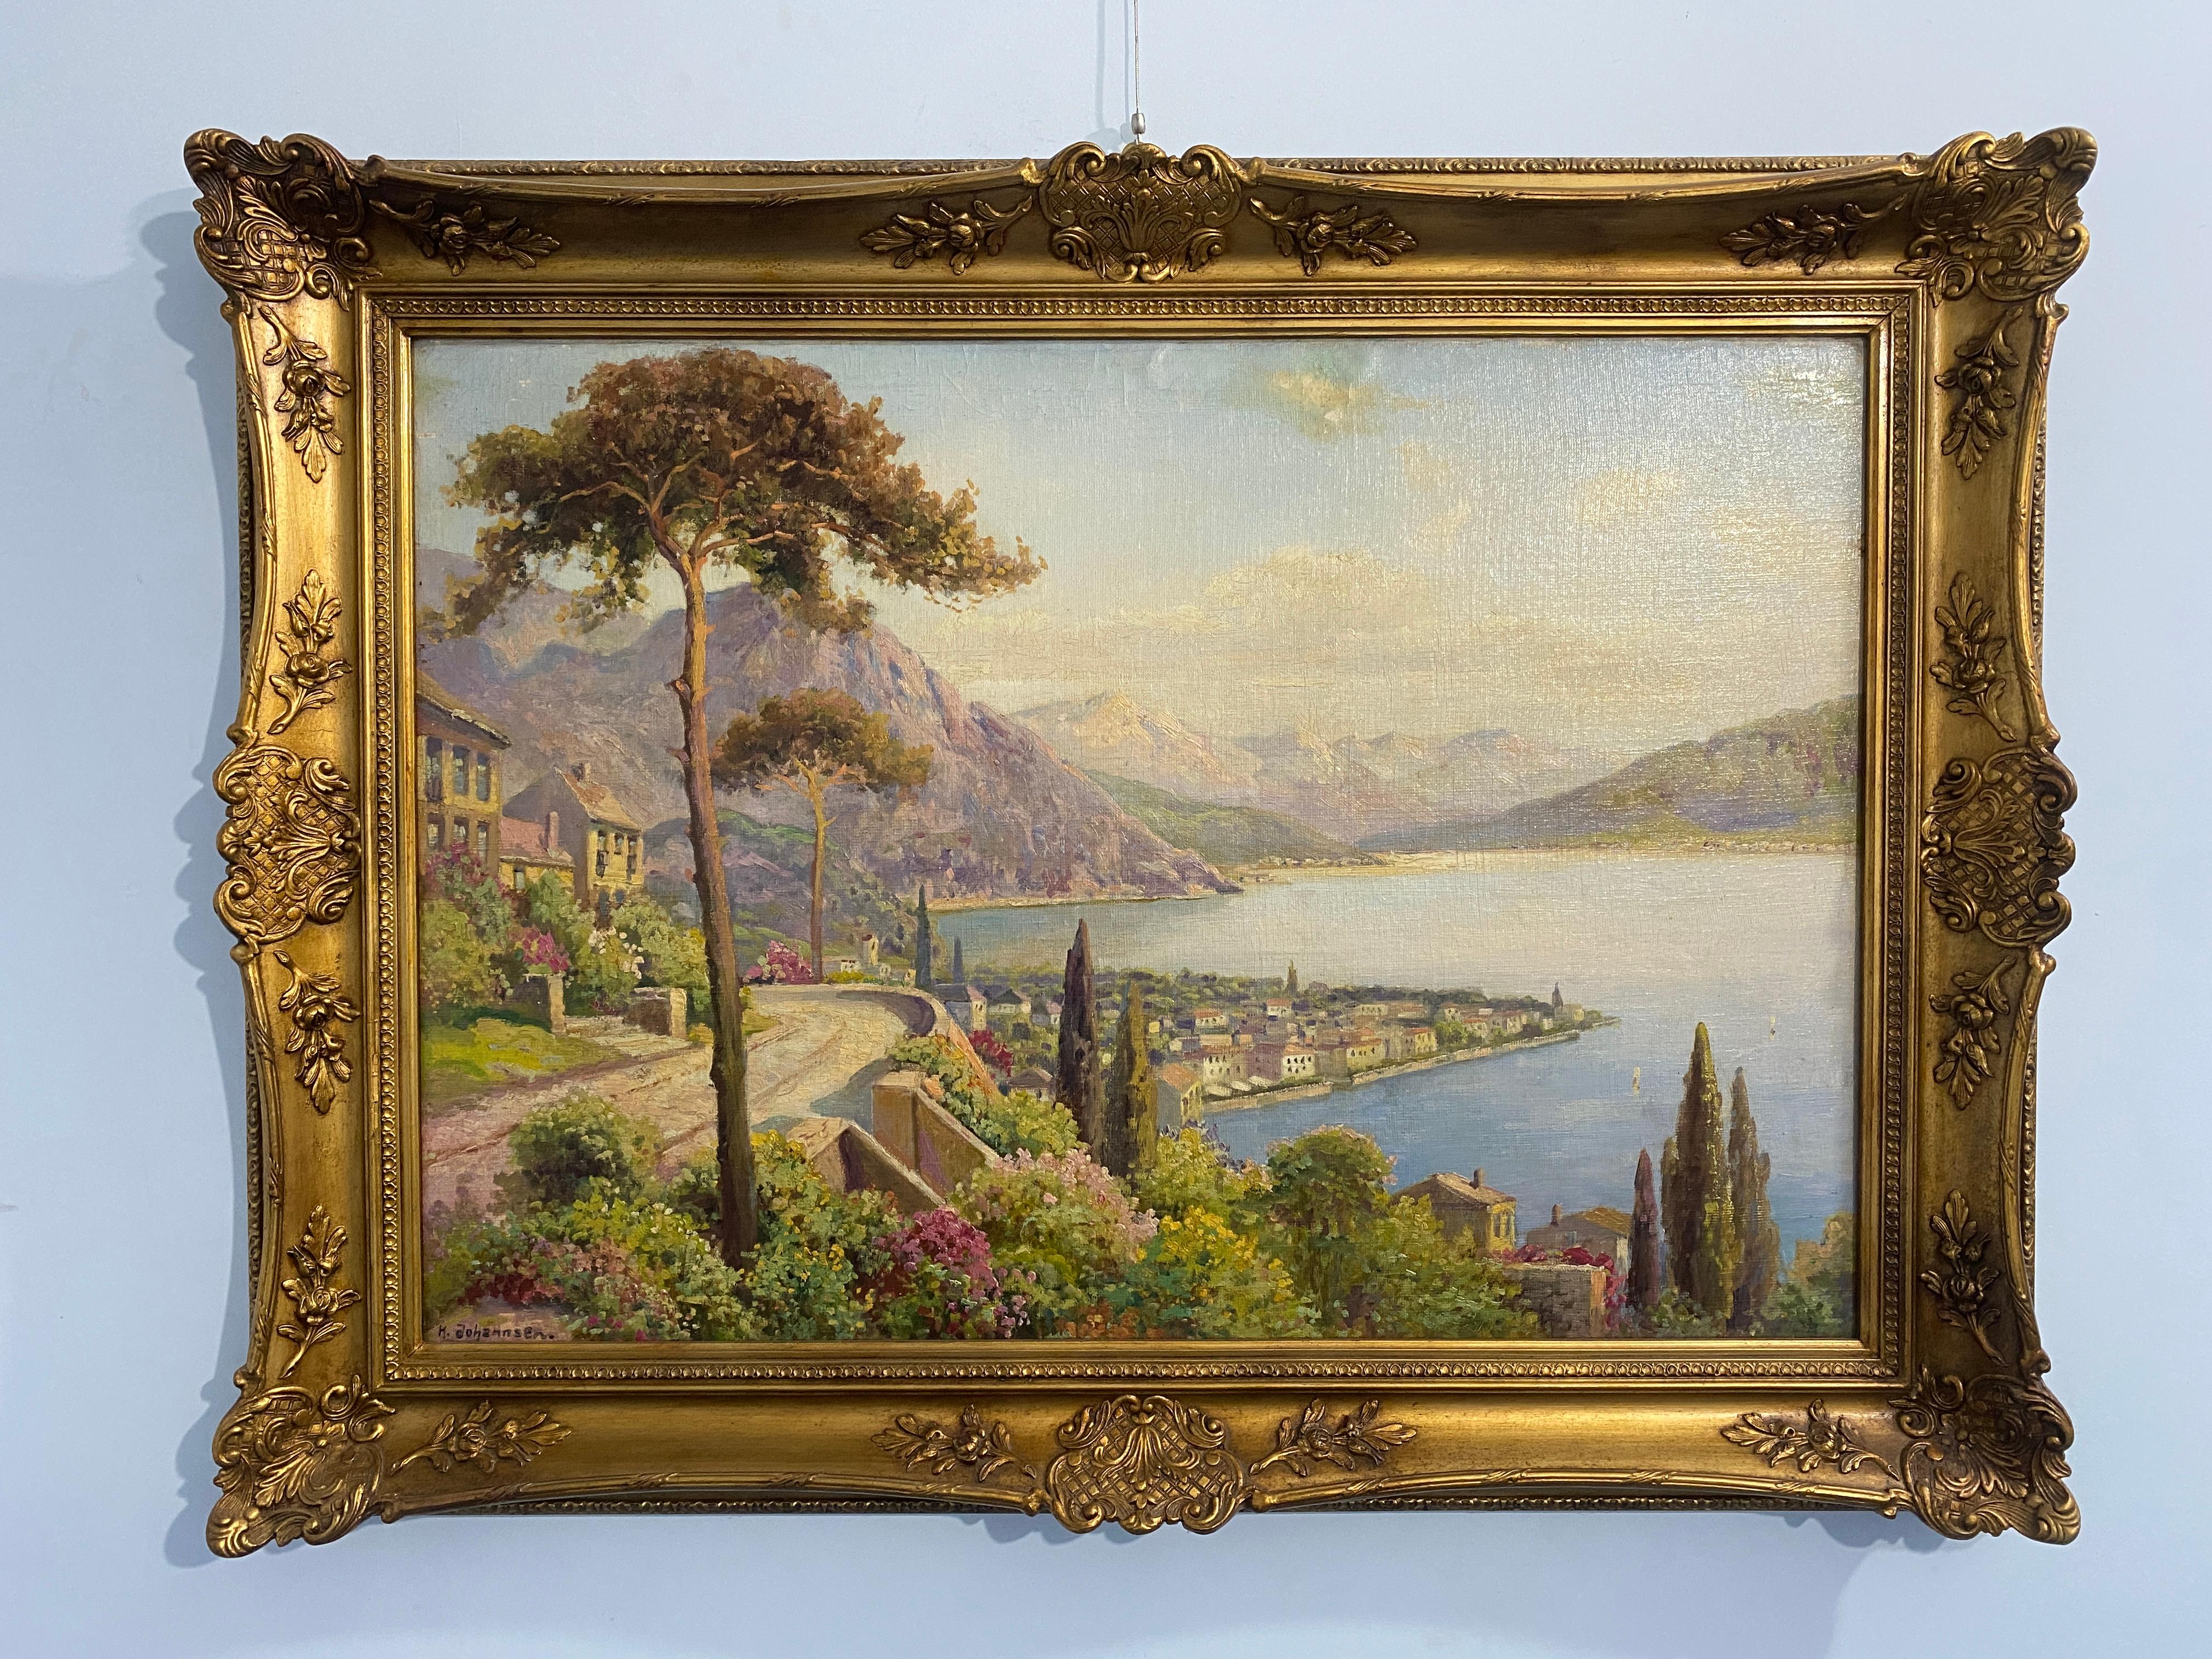 This splendid painting depicts in detail a bright view of a mountain lake,note the fine definition of details and the valuable perspective depth that give the work a feeling of pleasant serenity.
Original frame of the period, overall good condition